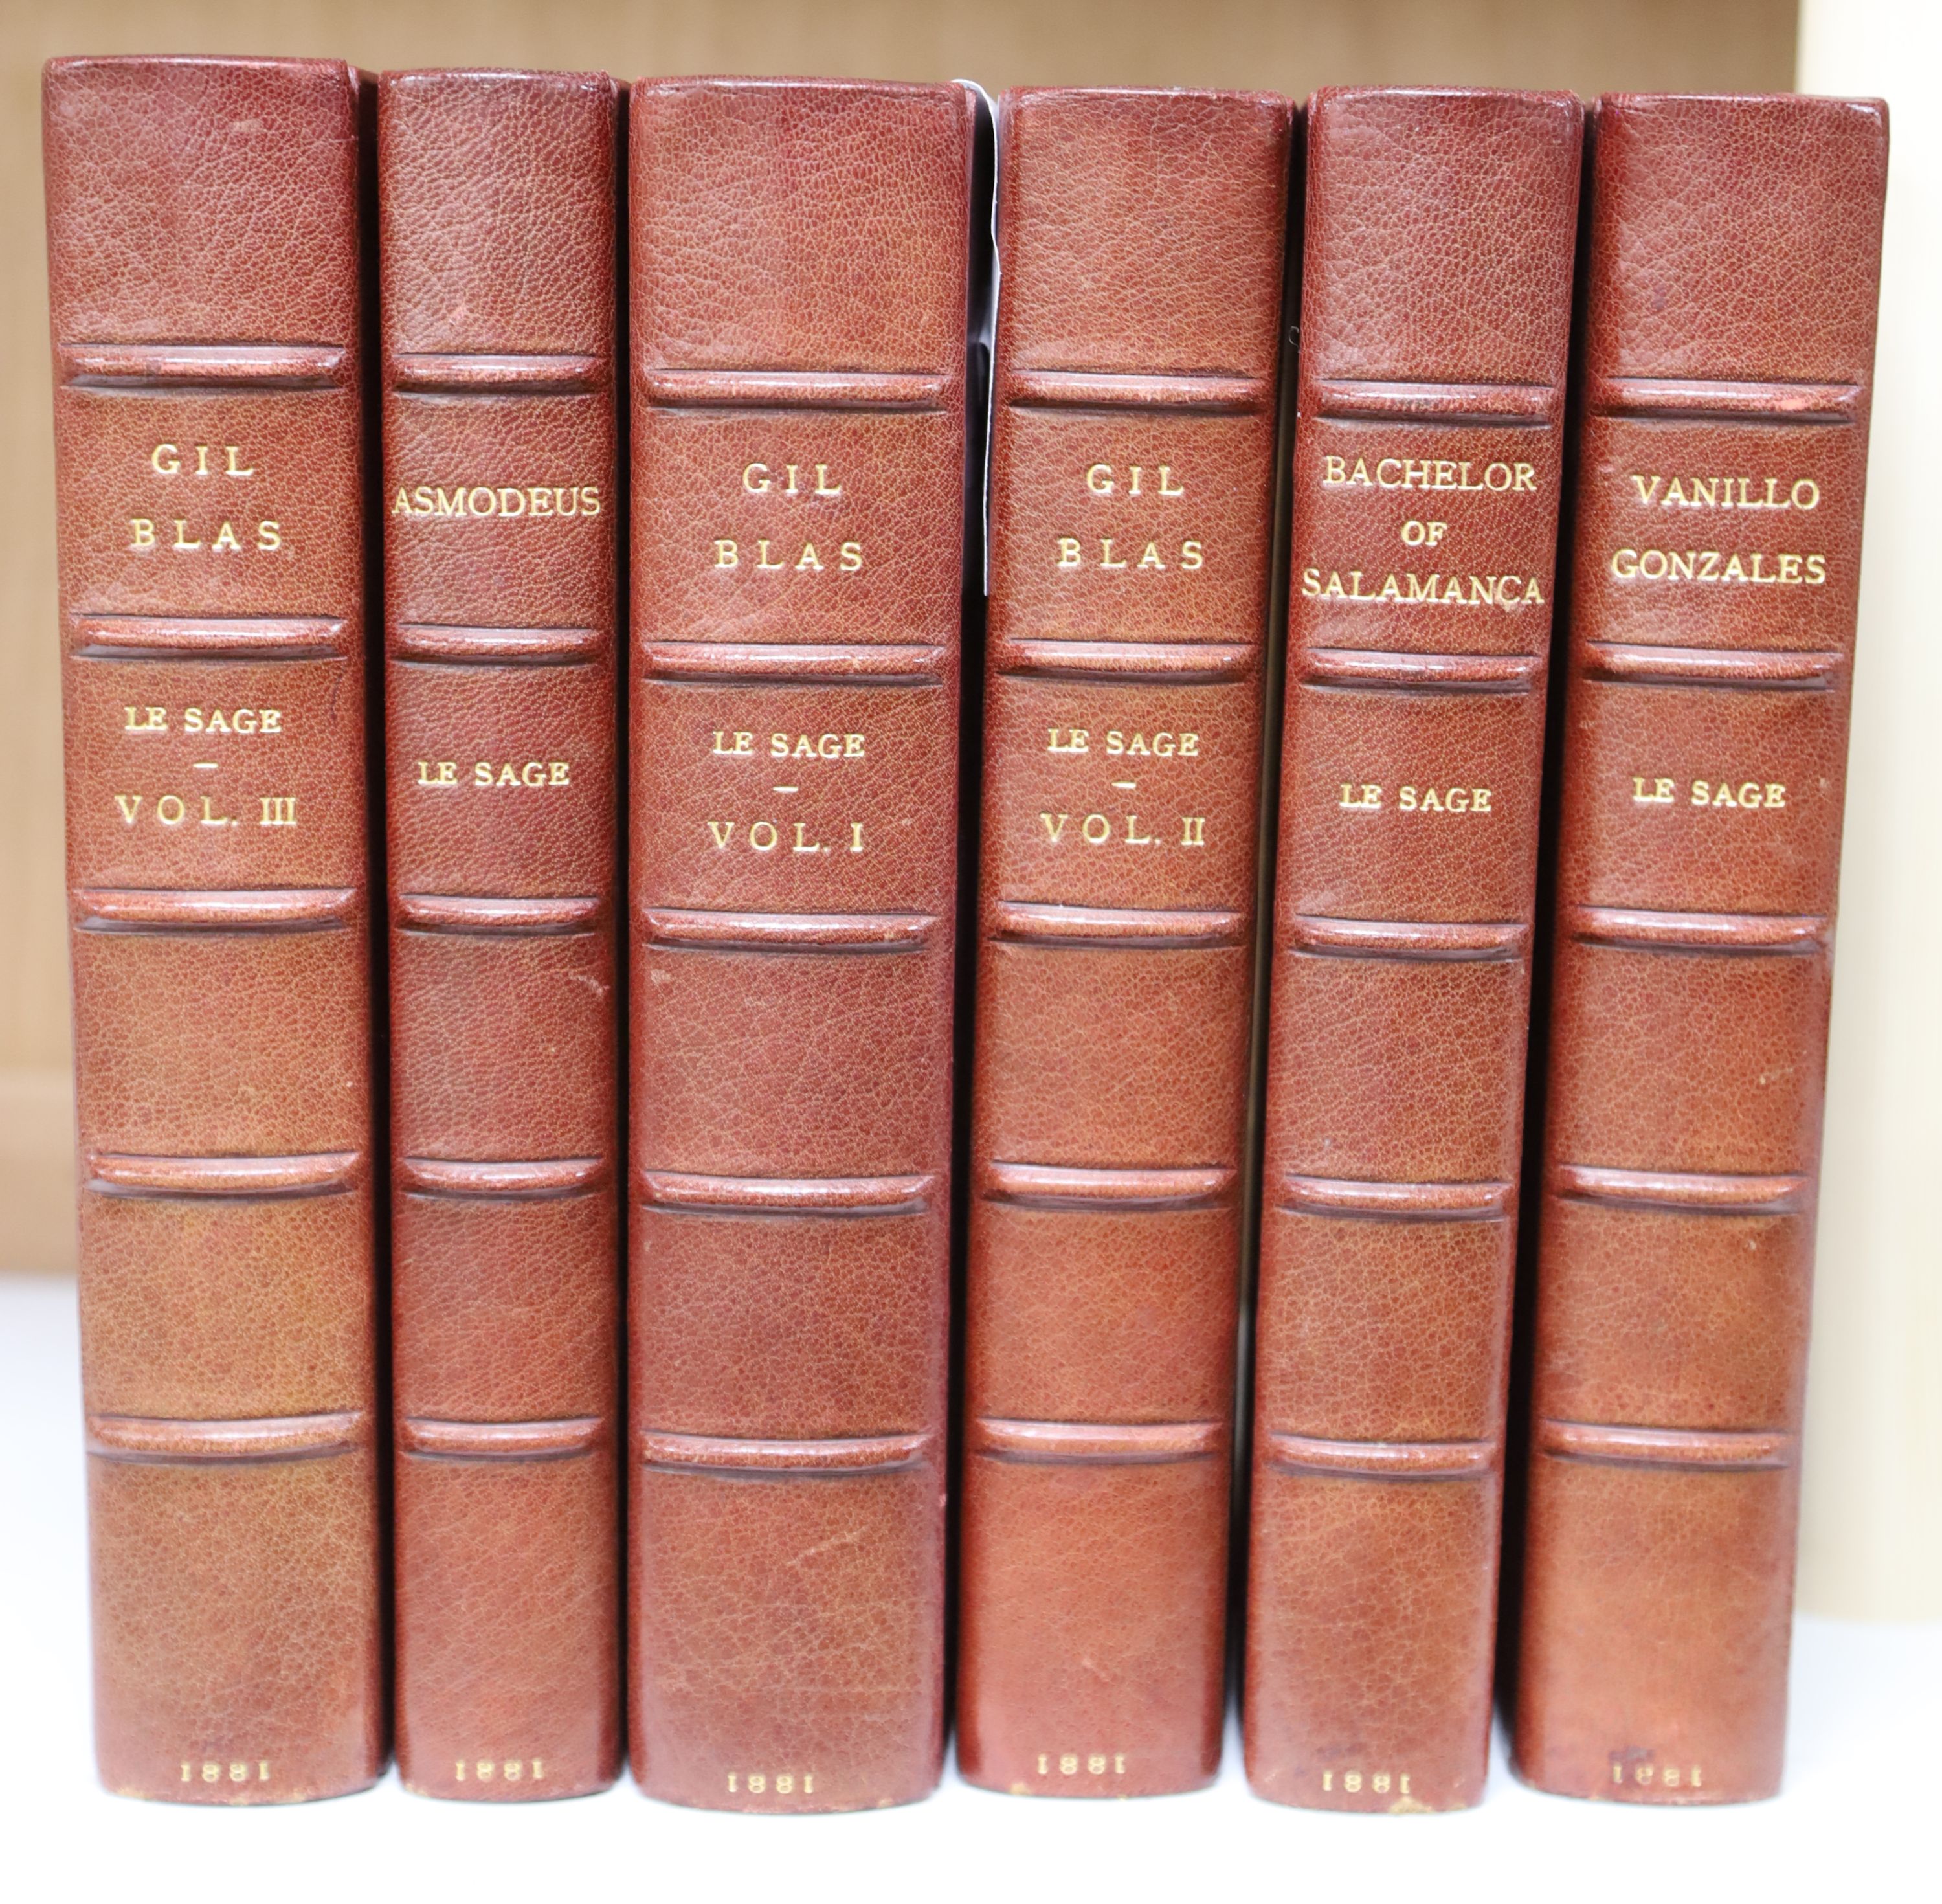 Le Sage, Alain Rene - The Adventures of Gil Blas of Santillane, translated by Tobias Smollet, 3 vols, 8vo, with 12 etched plates, toget